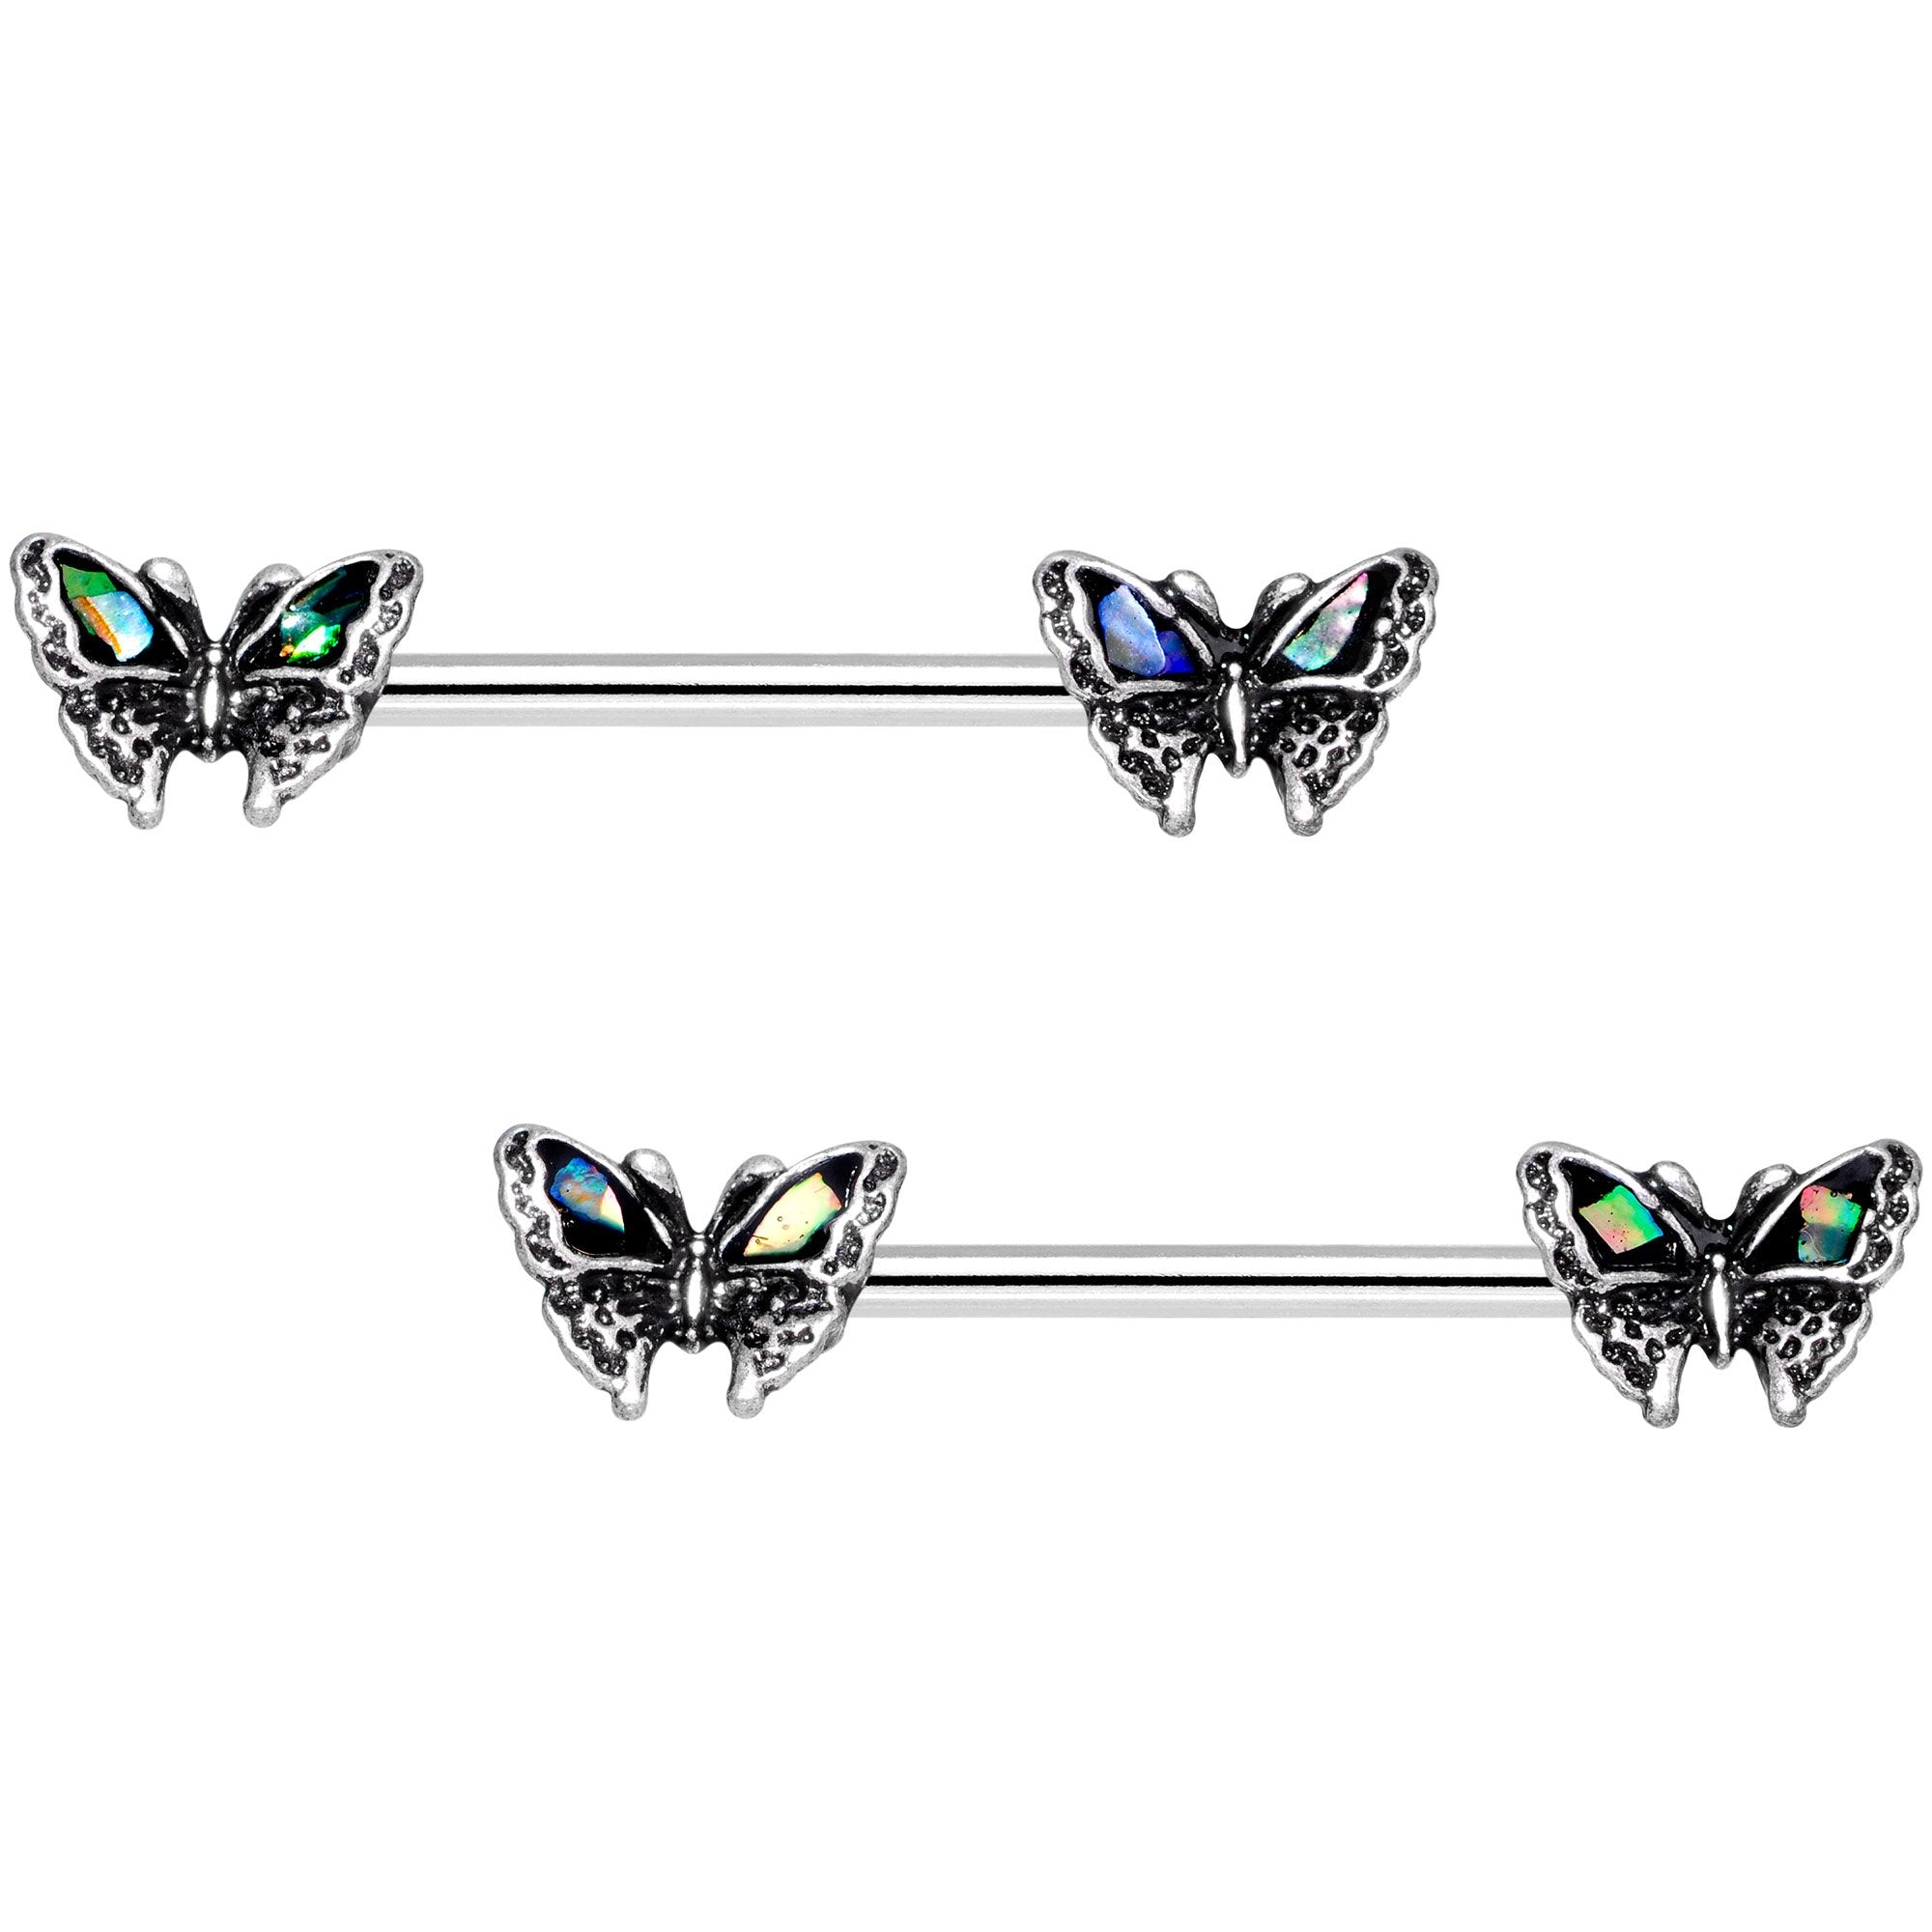 5/8 White Faux Opal Summer Butterfly Barbell Nipple Ring Set